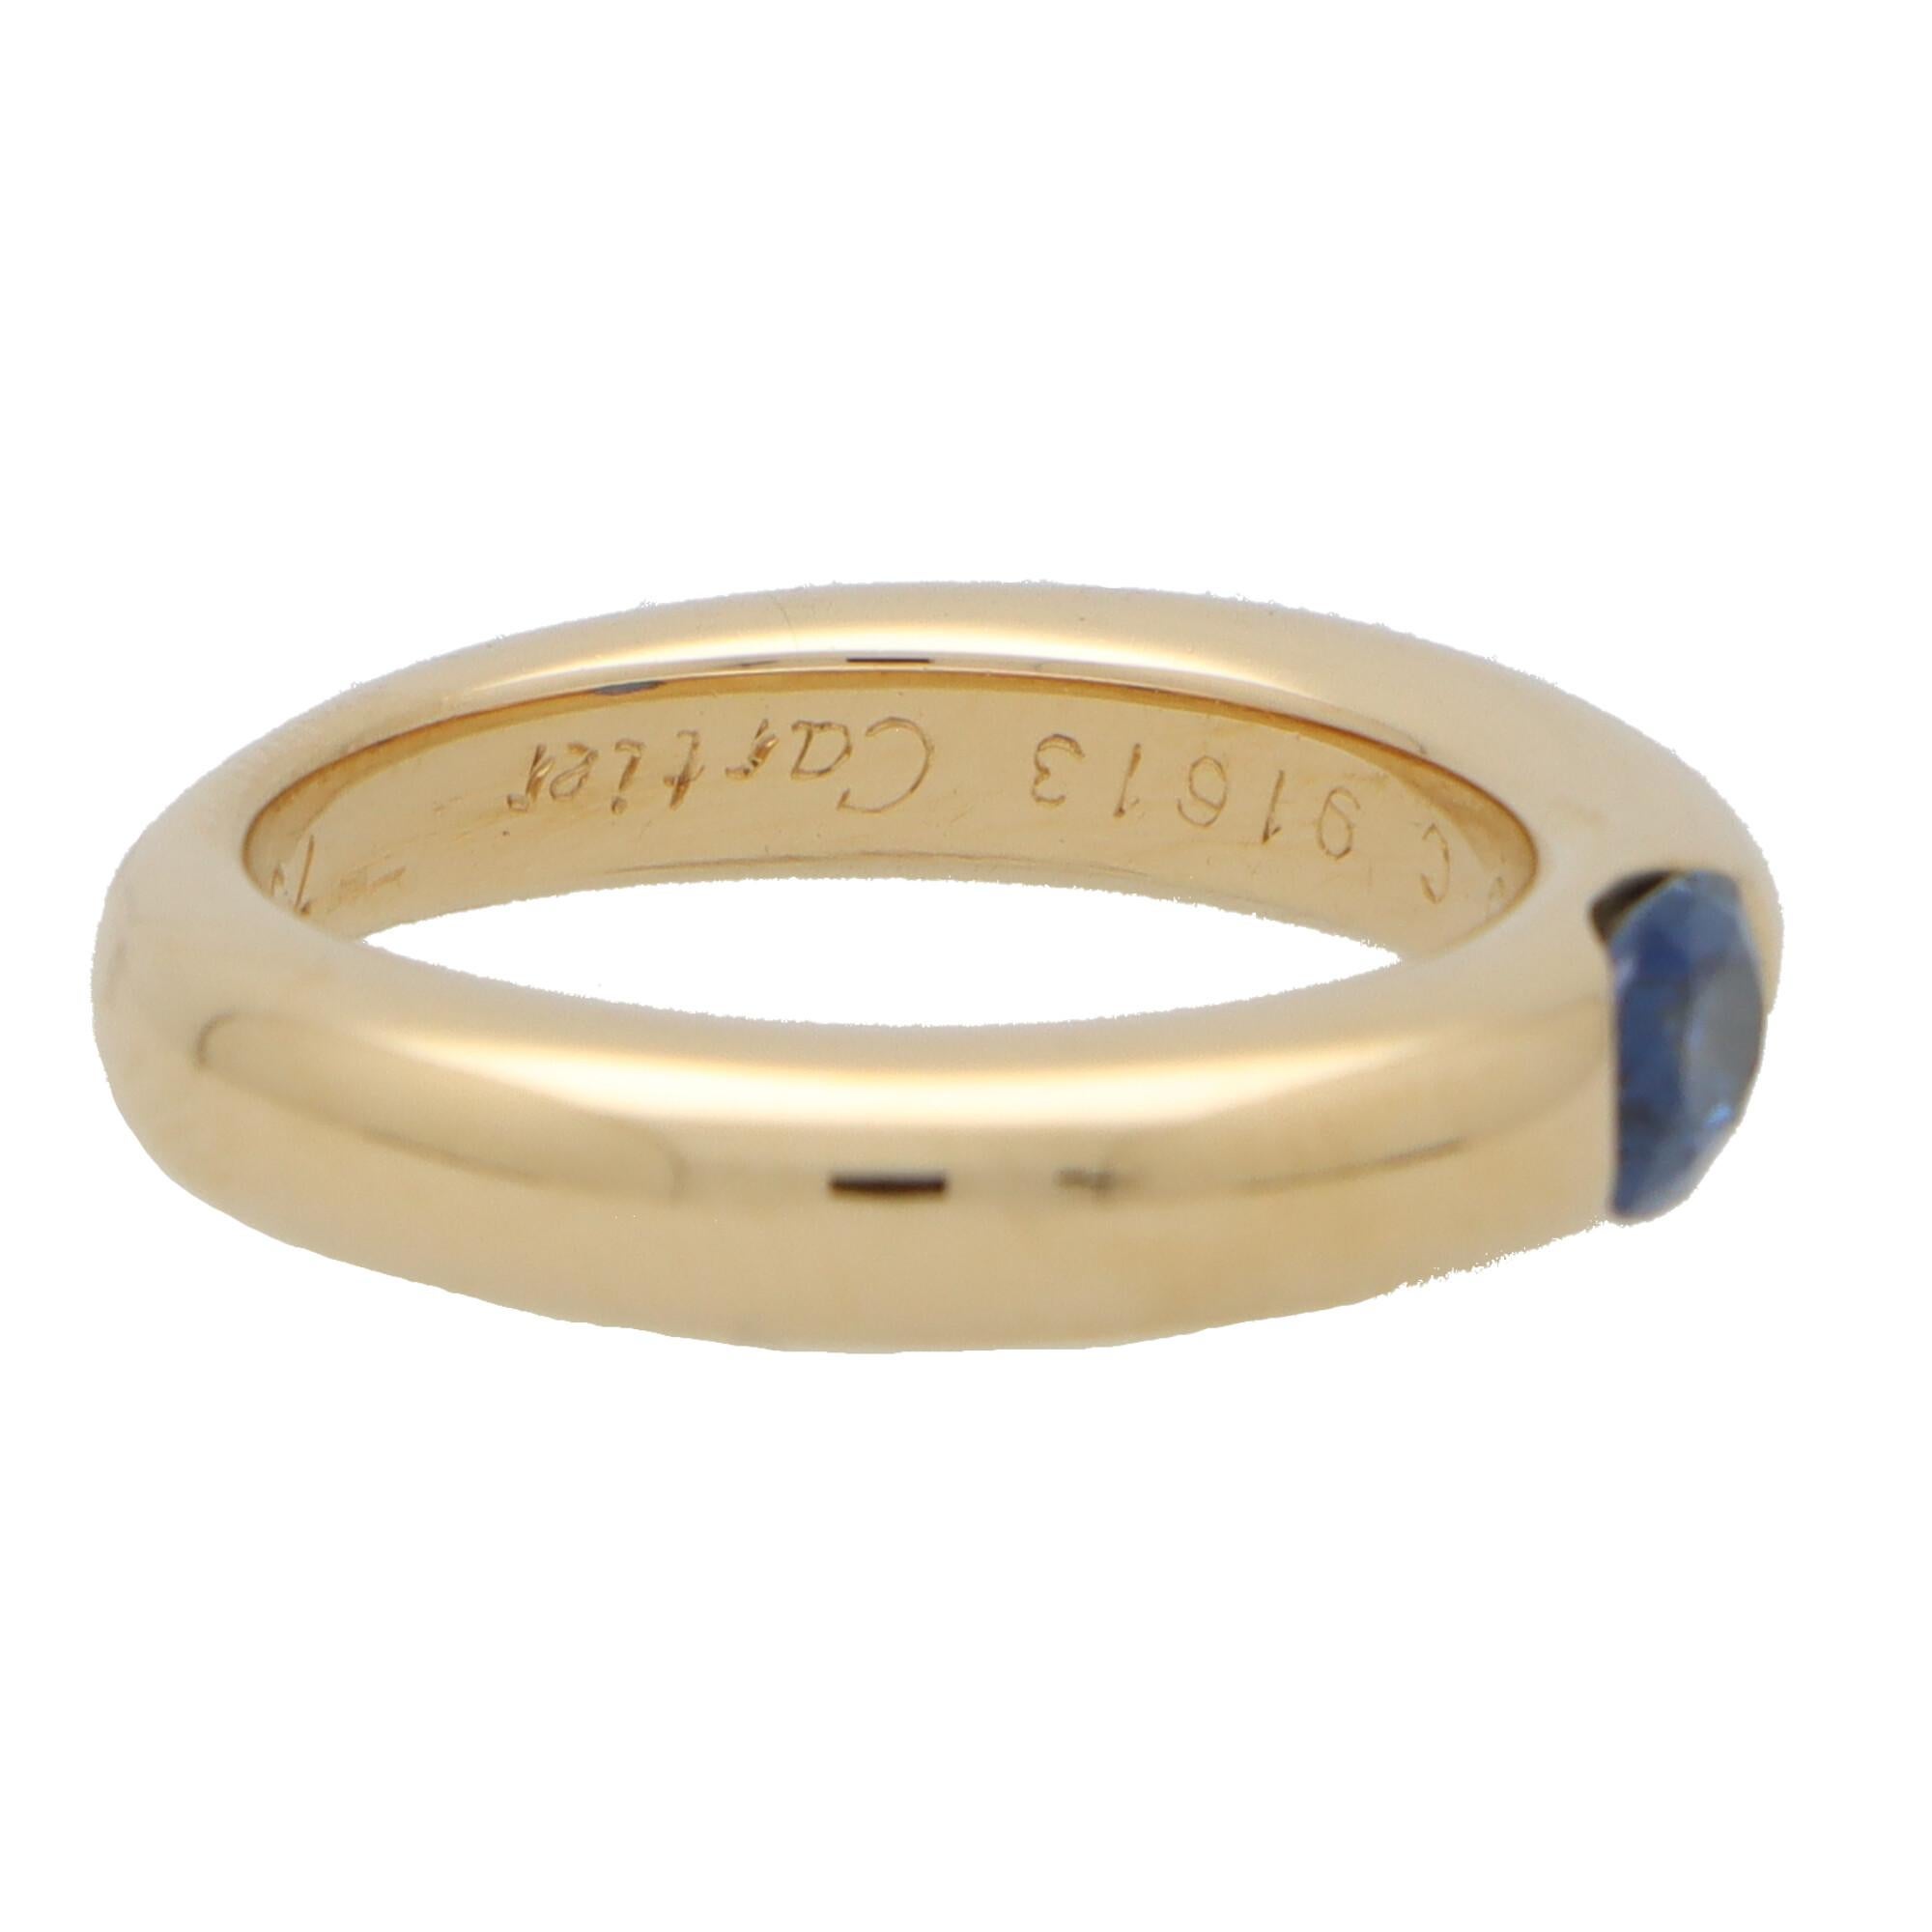 A beautiful vintage Cartier 'Ellipse' sapphire band ring set in 18k yellow gold. 

From the now discontinued Ellipse collection, the ring is solely set with a vibrant oval cut blue sapphire. The sapphire is securely bezel set within a 4-millimetre